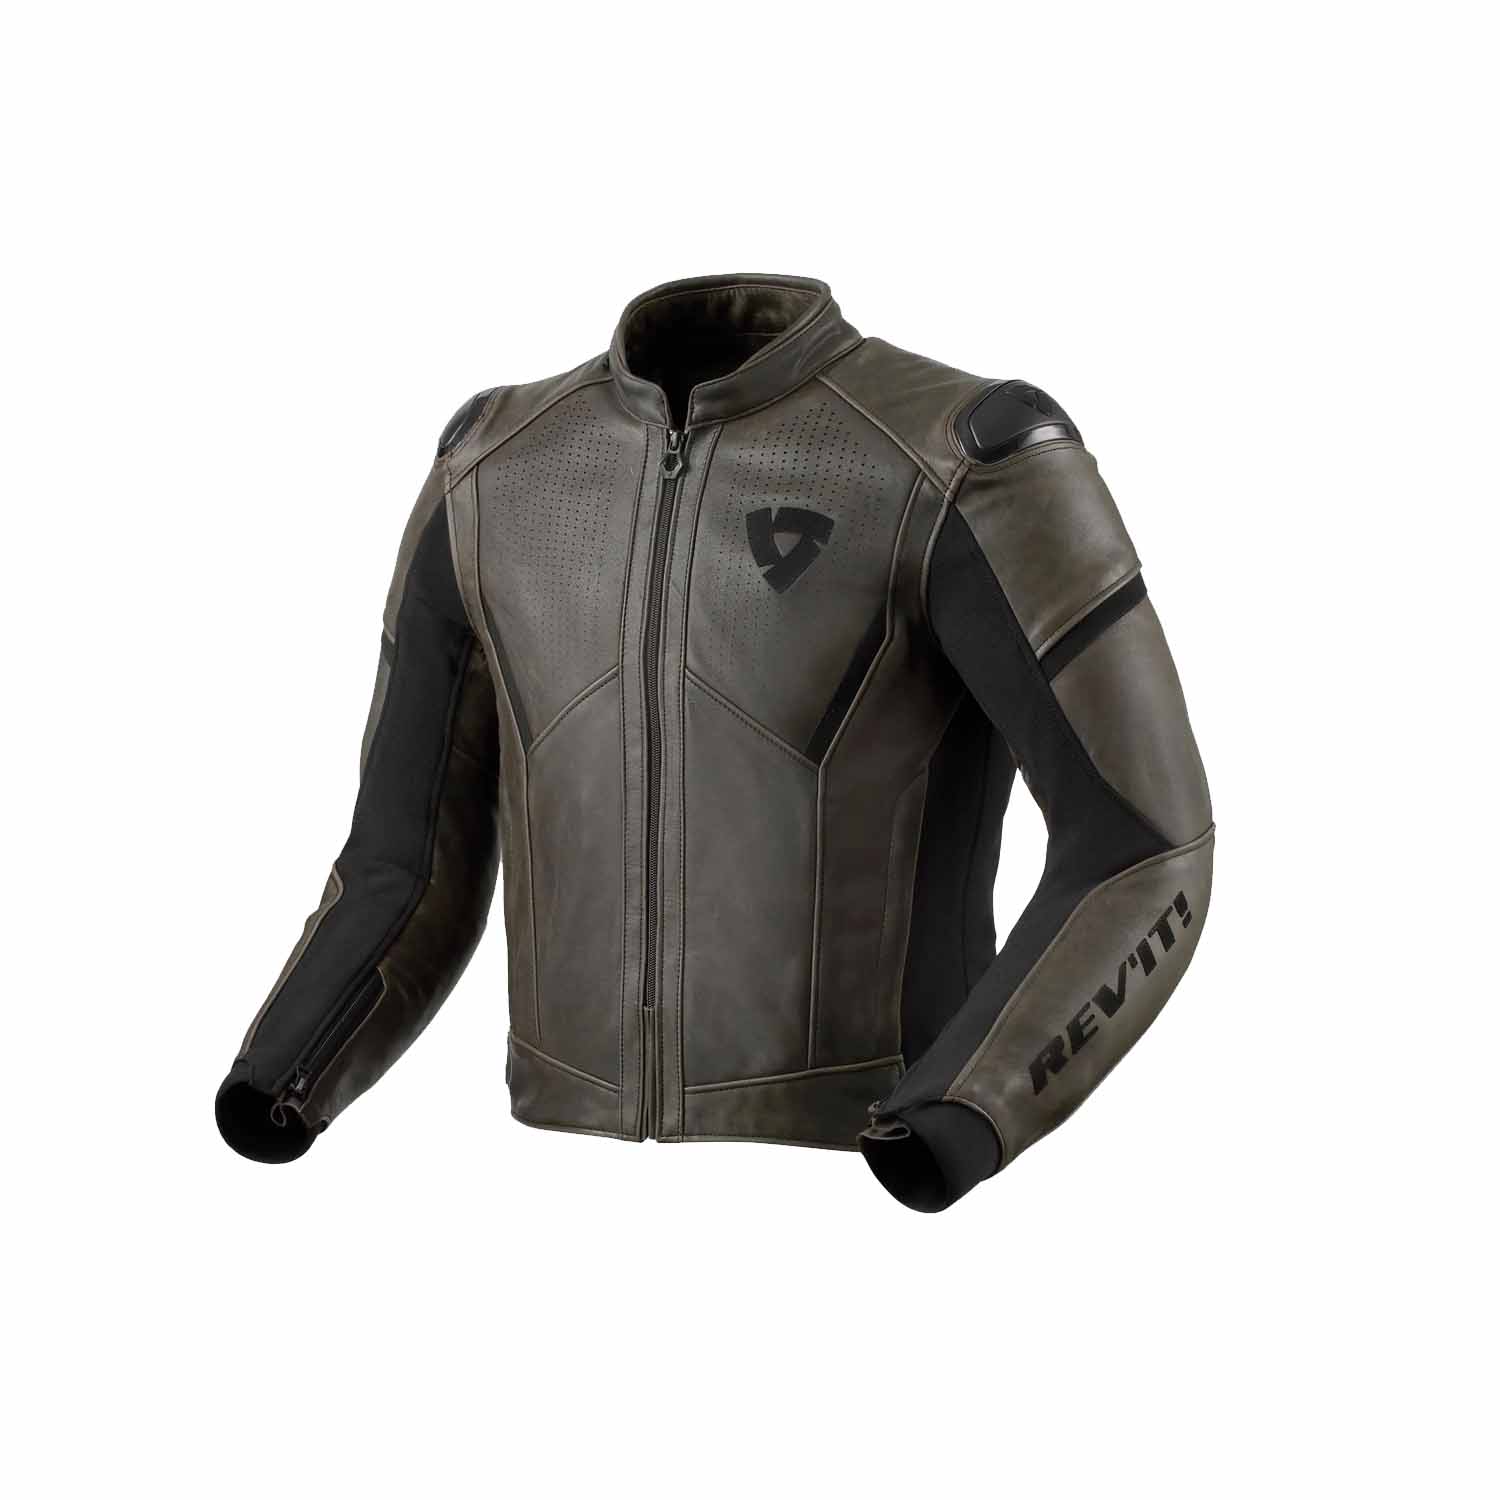 Image of EU REV'IT! Parallax Jacket Black Olive Taille 48